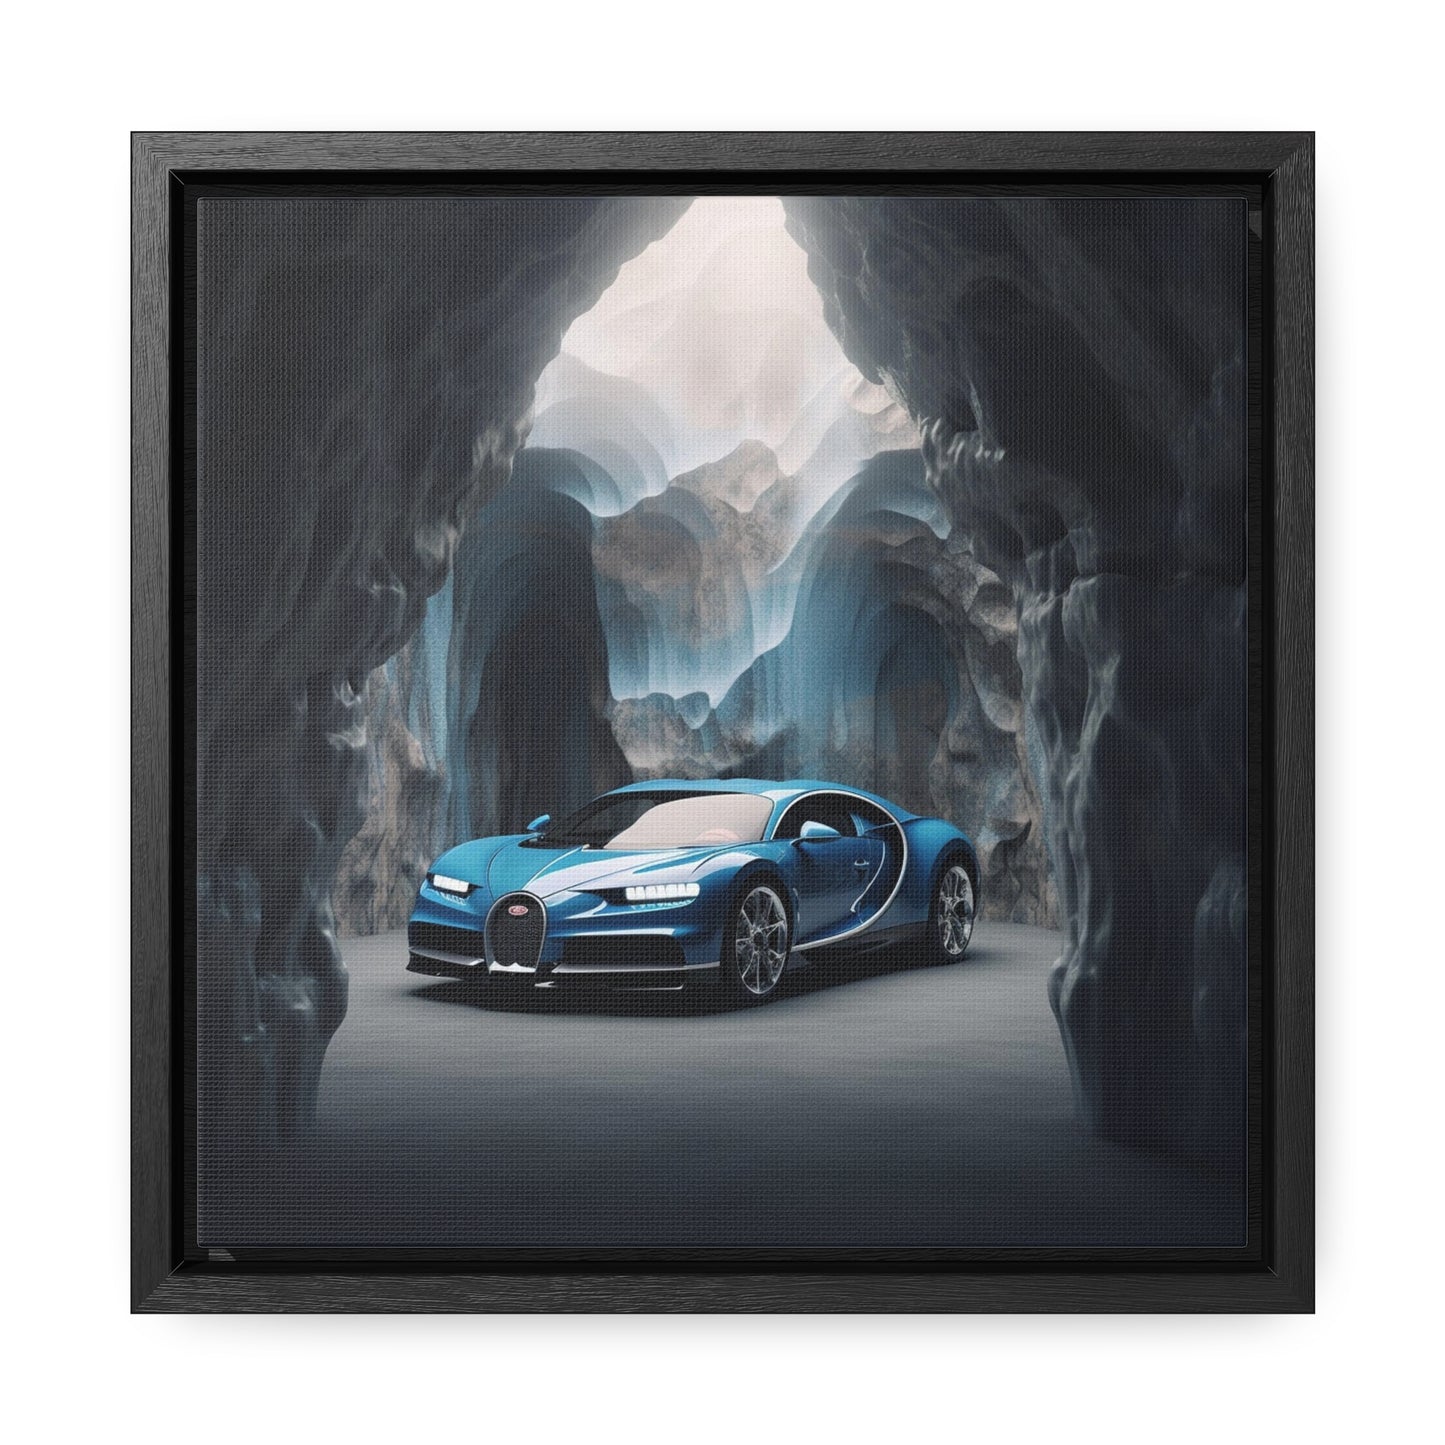 Gallery Canvas Wraps, Square Frame Bugatti Real Look 2